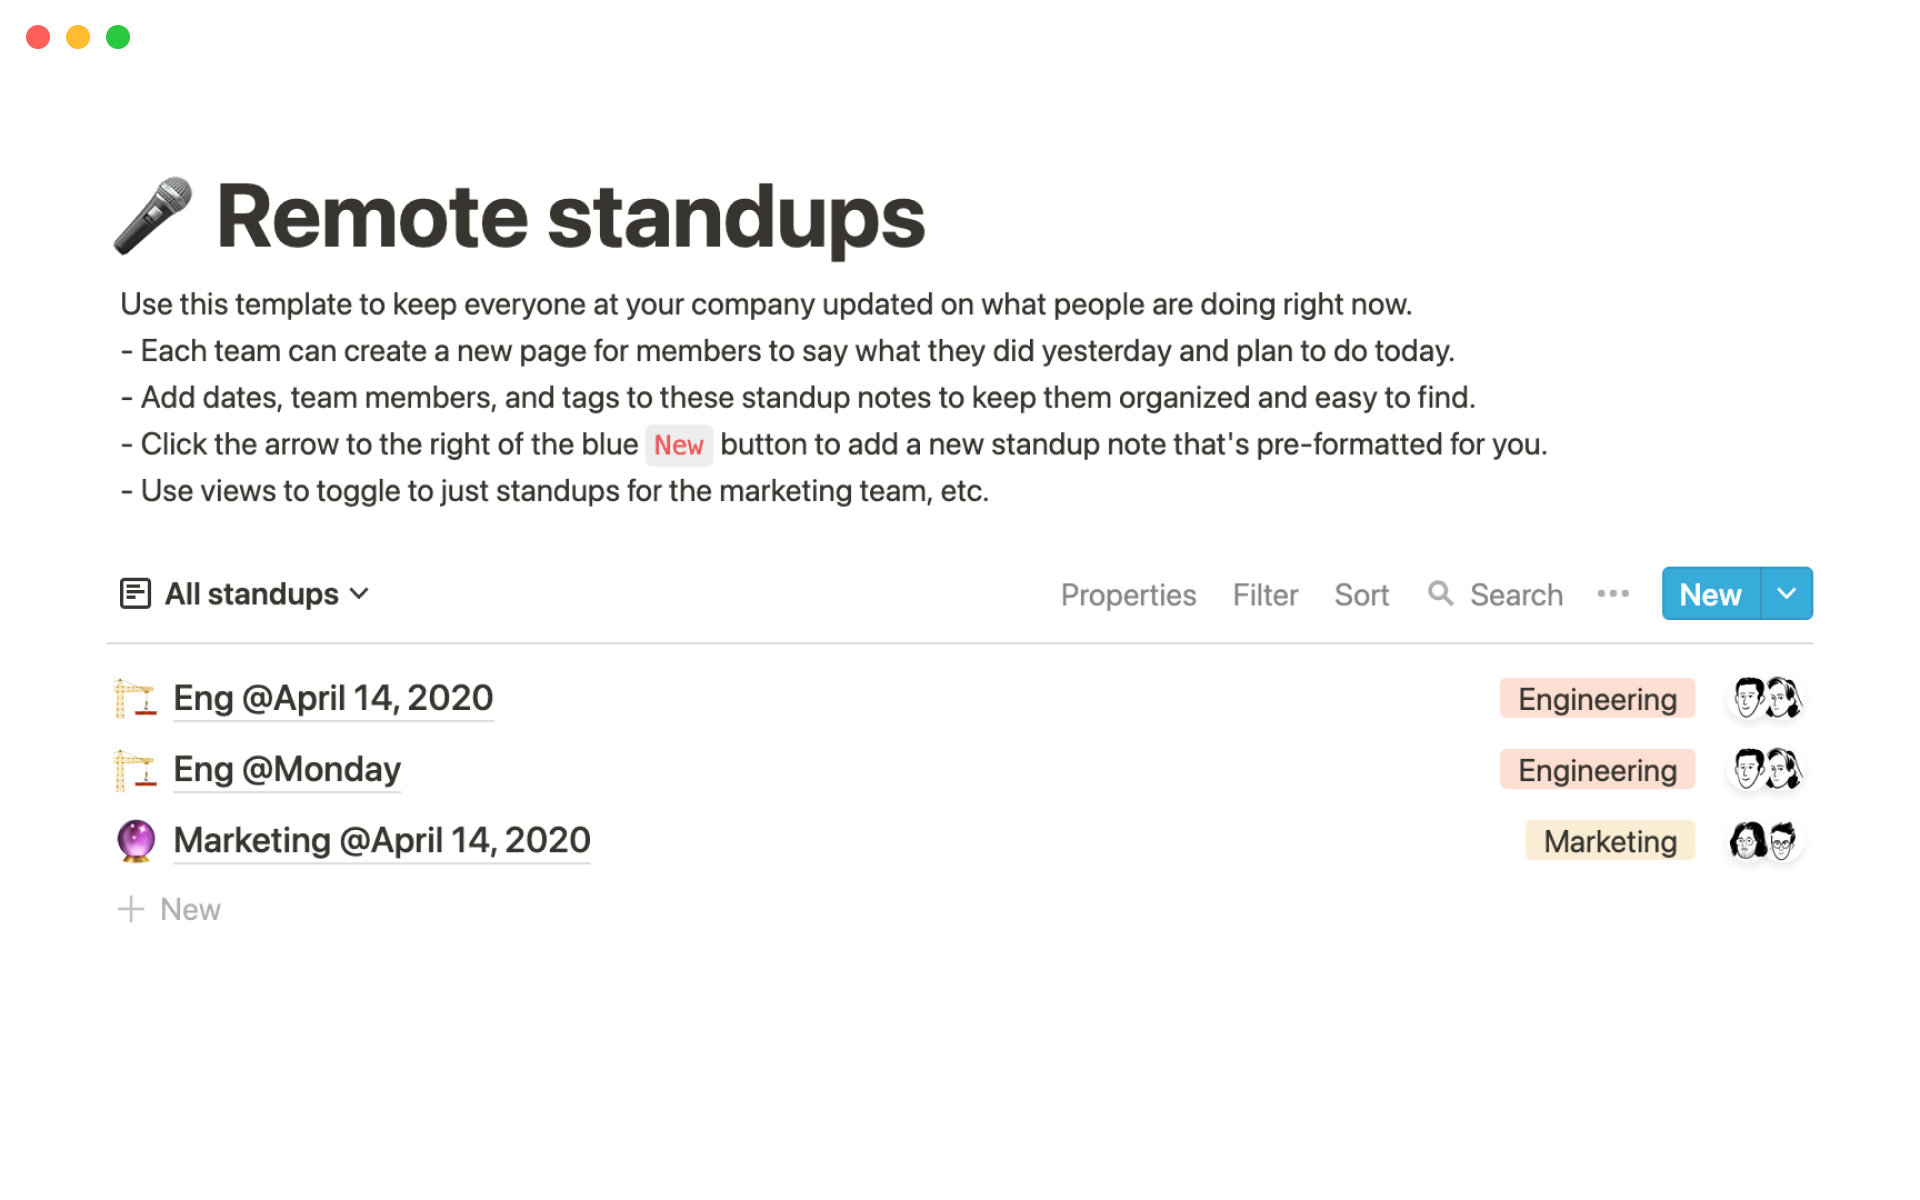 The desktop image for the Remote standups template